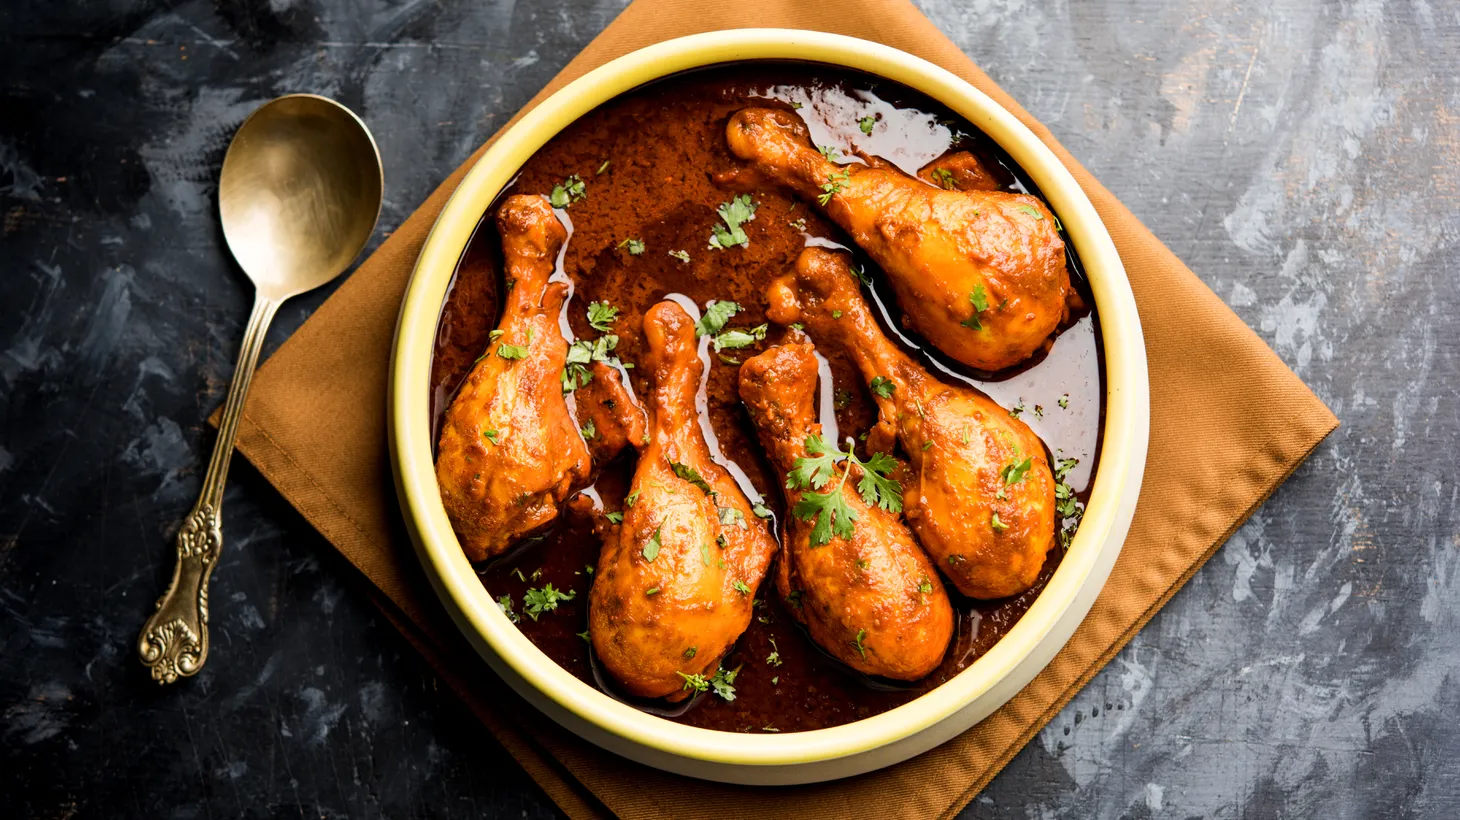 Chicken drumsticks prepared as Murg Tangdi are served in a bowl of fragrant sauce.